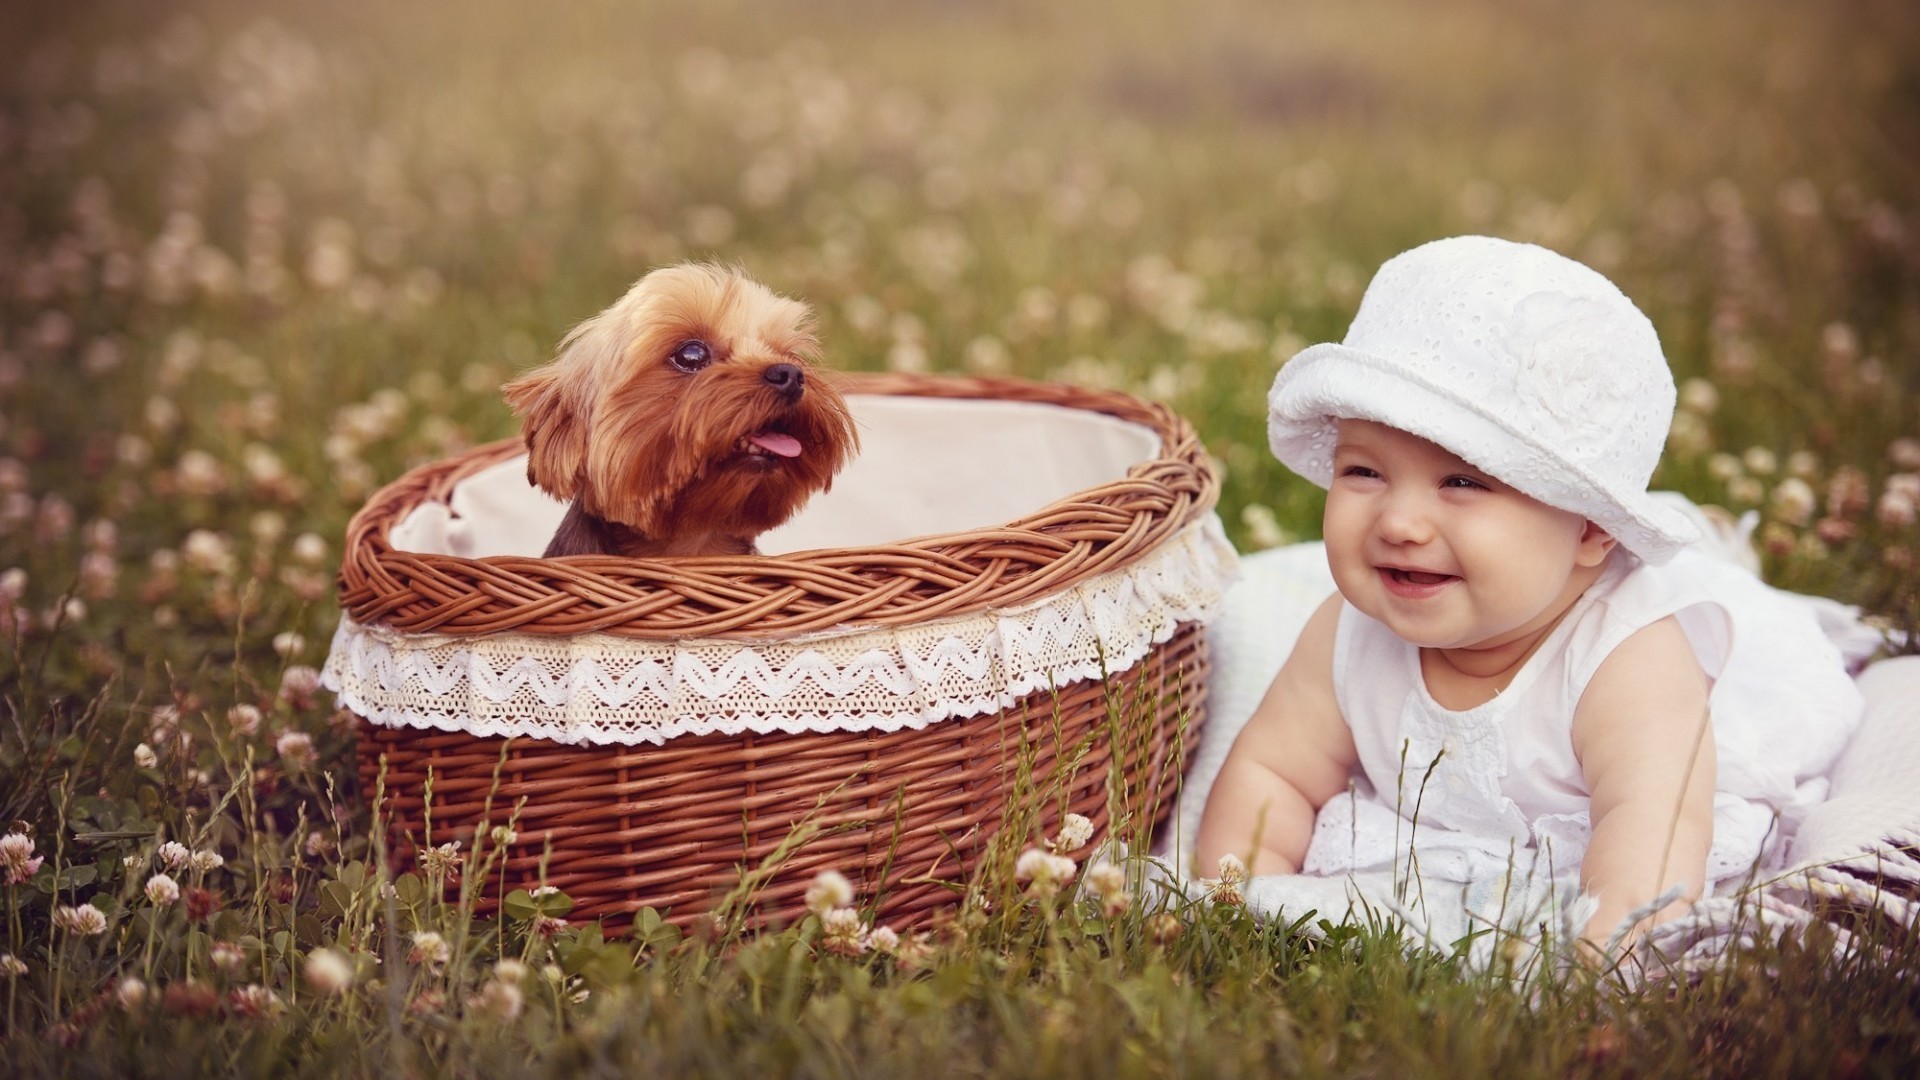 General 1920x1080 baby puppies dog grass baskets smiling